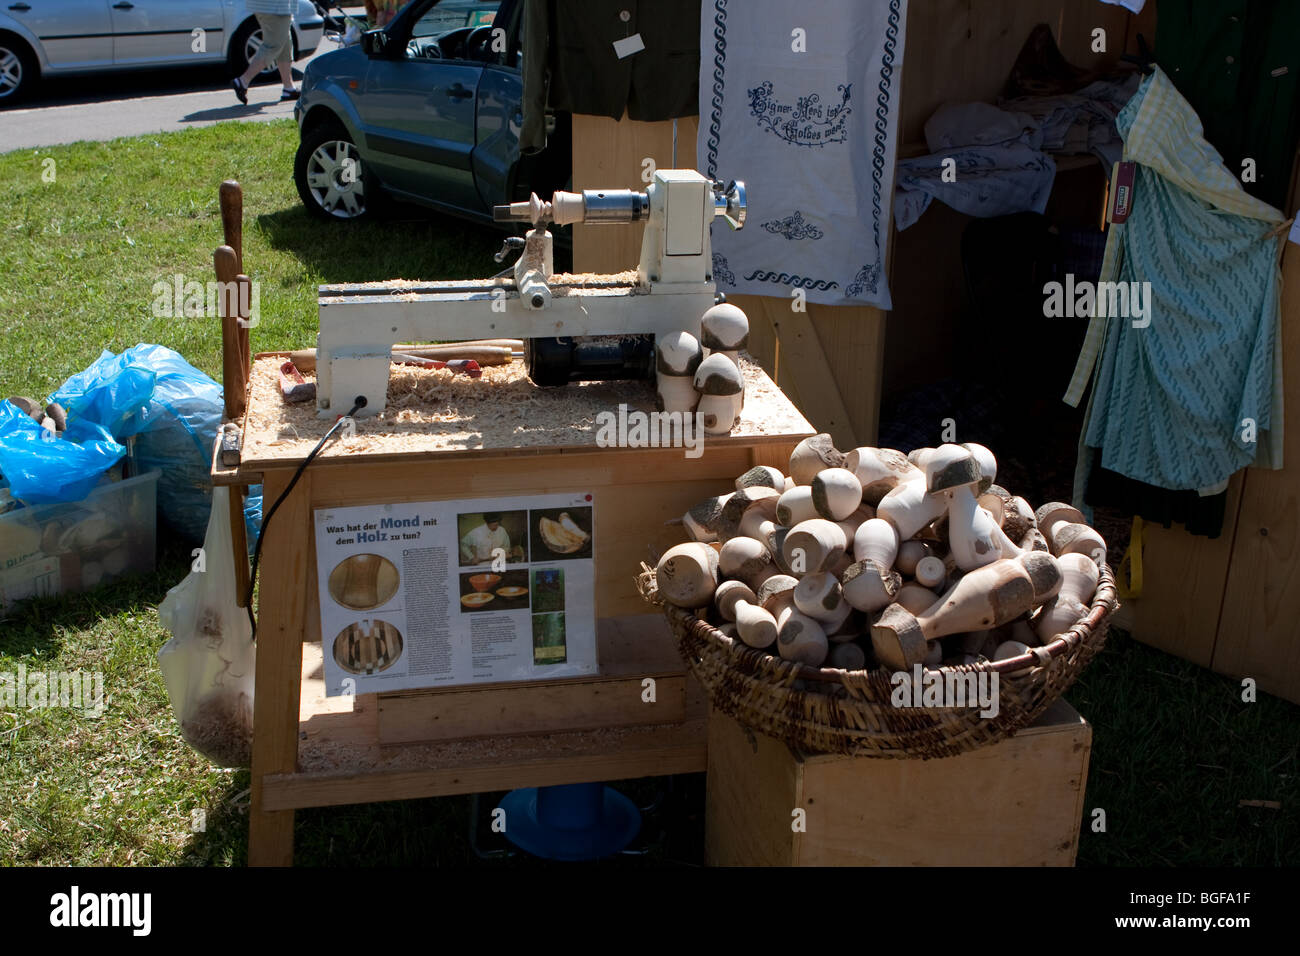 View of drill machine used to carve toys from wood in Bavaria, Germany Stock Photo